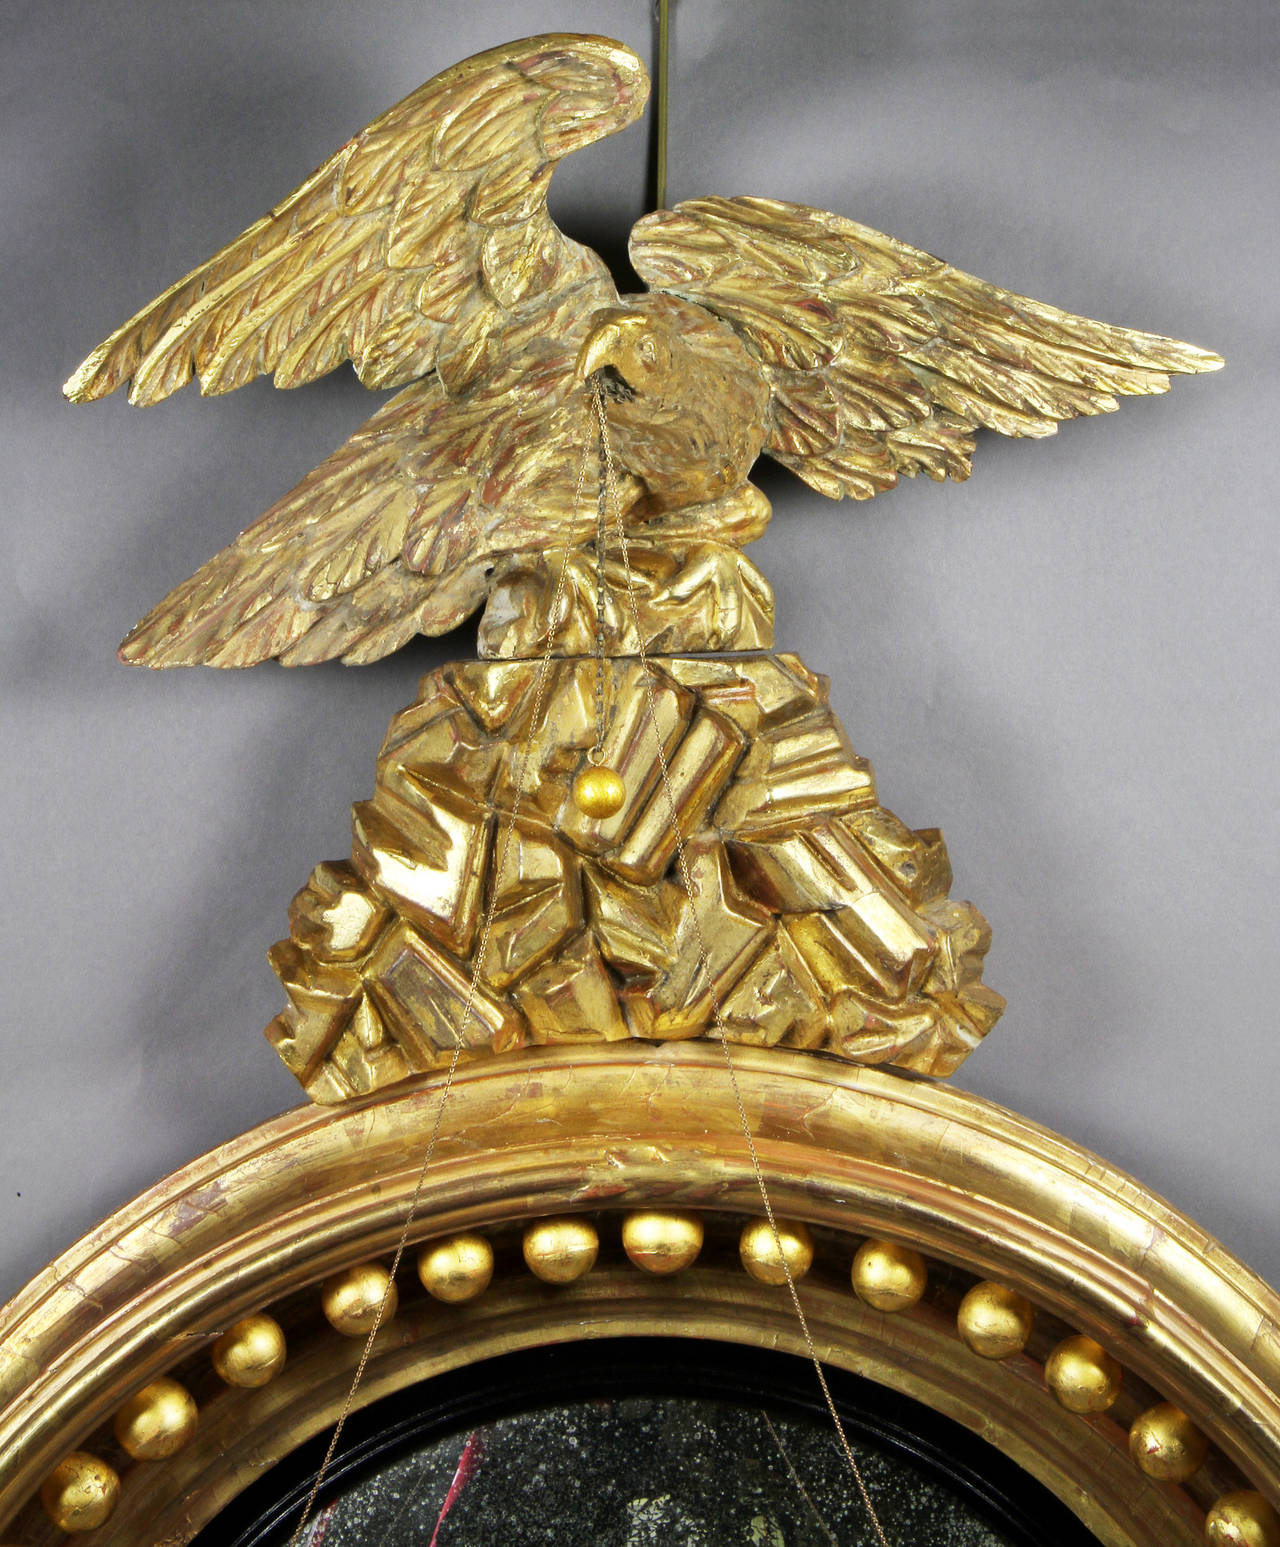 Eagle on rockwork superstructure over a convex mirror within an ebonized band and moulded frame with balls.